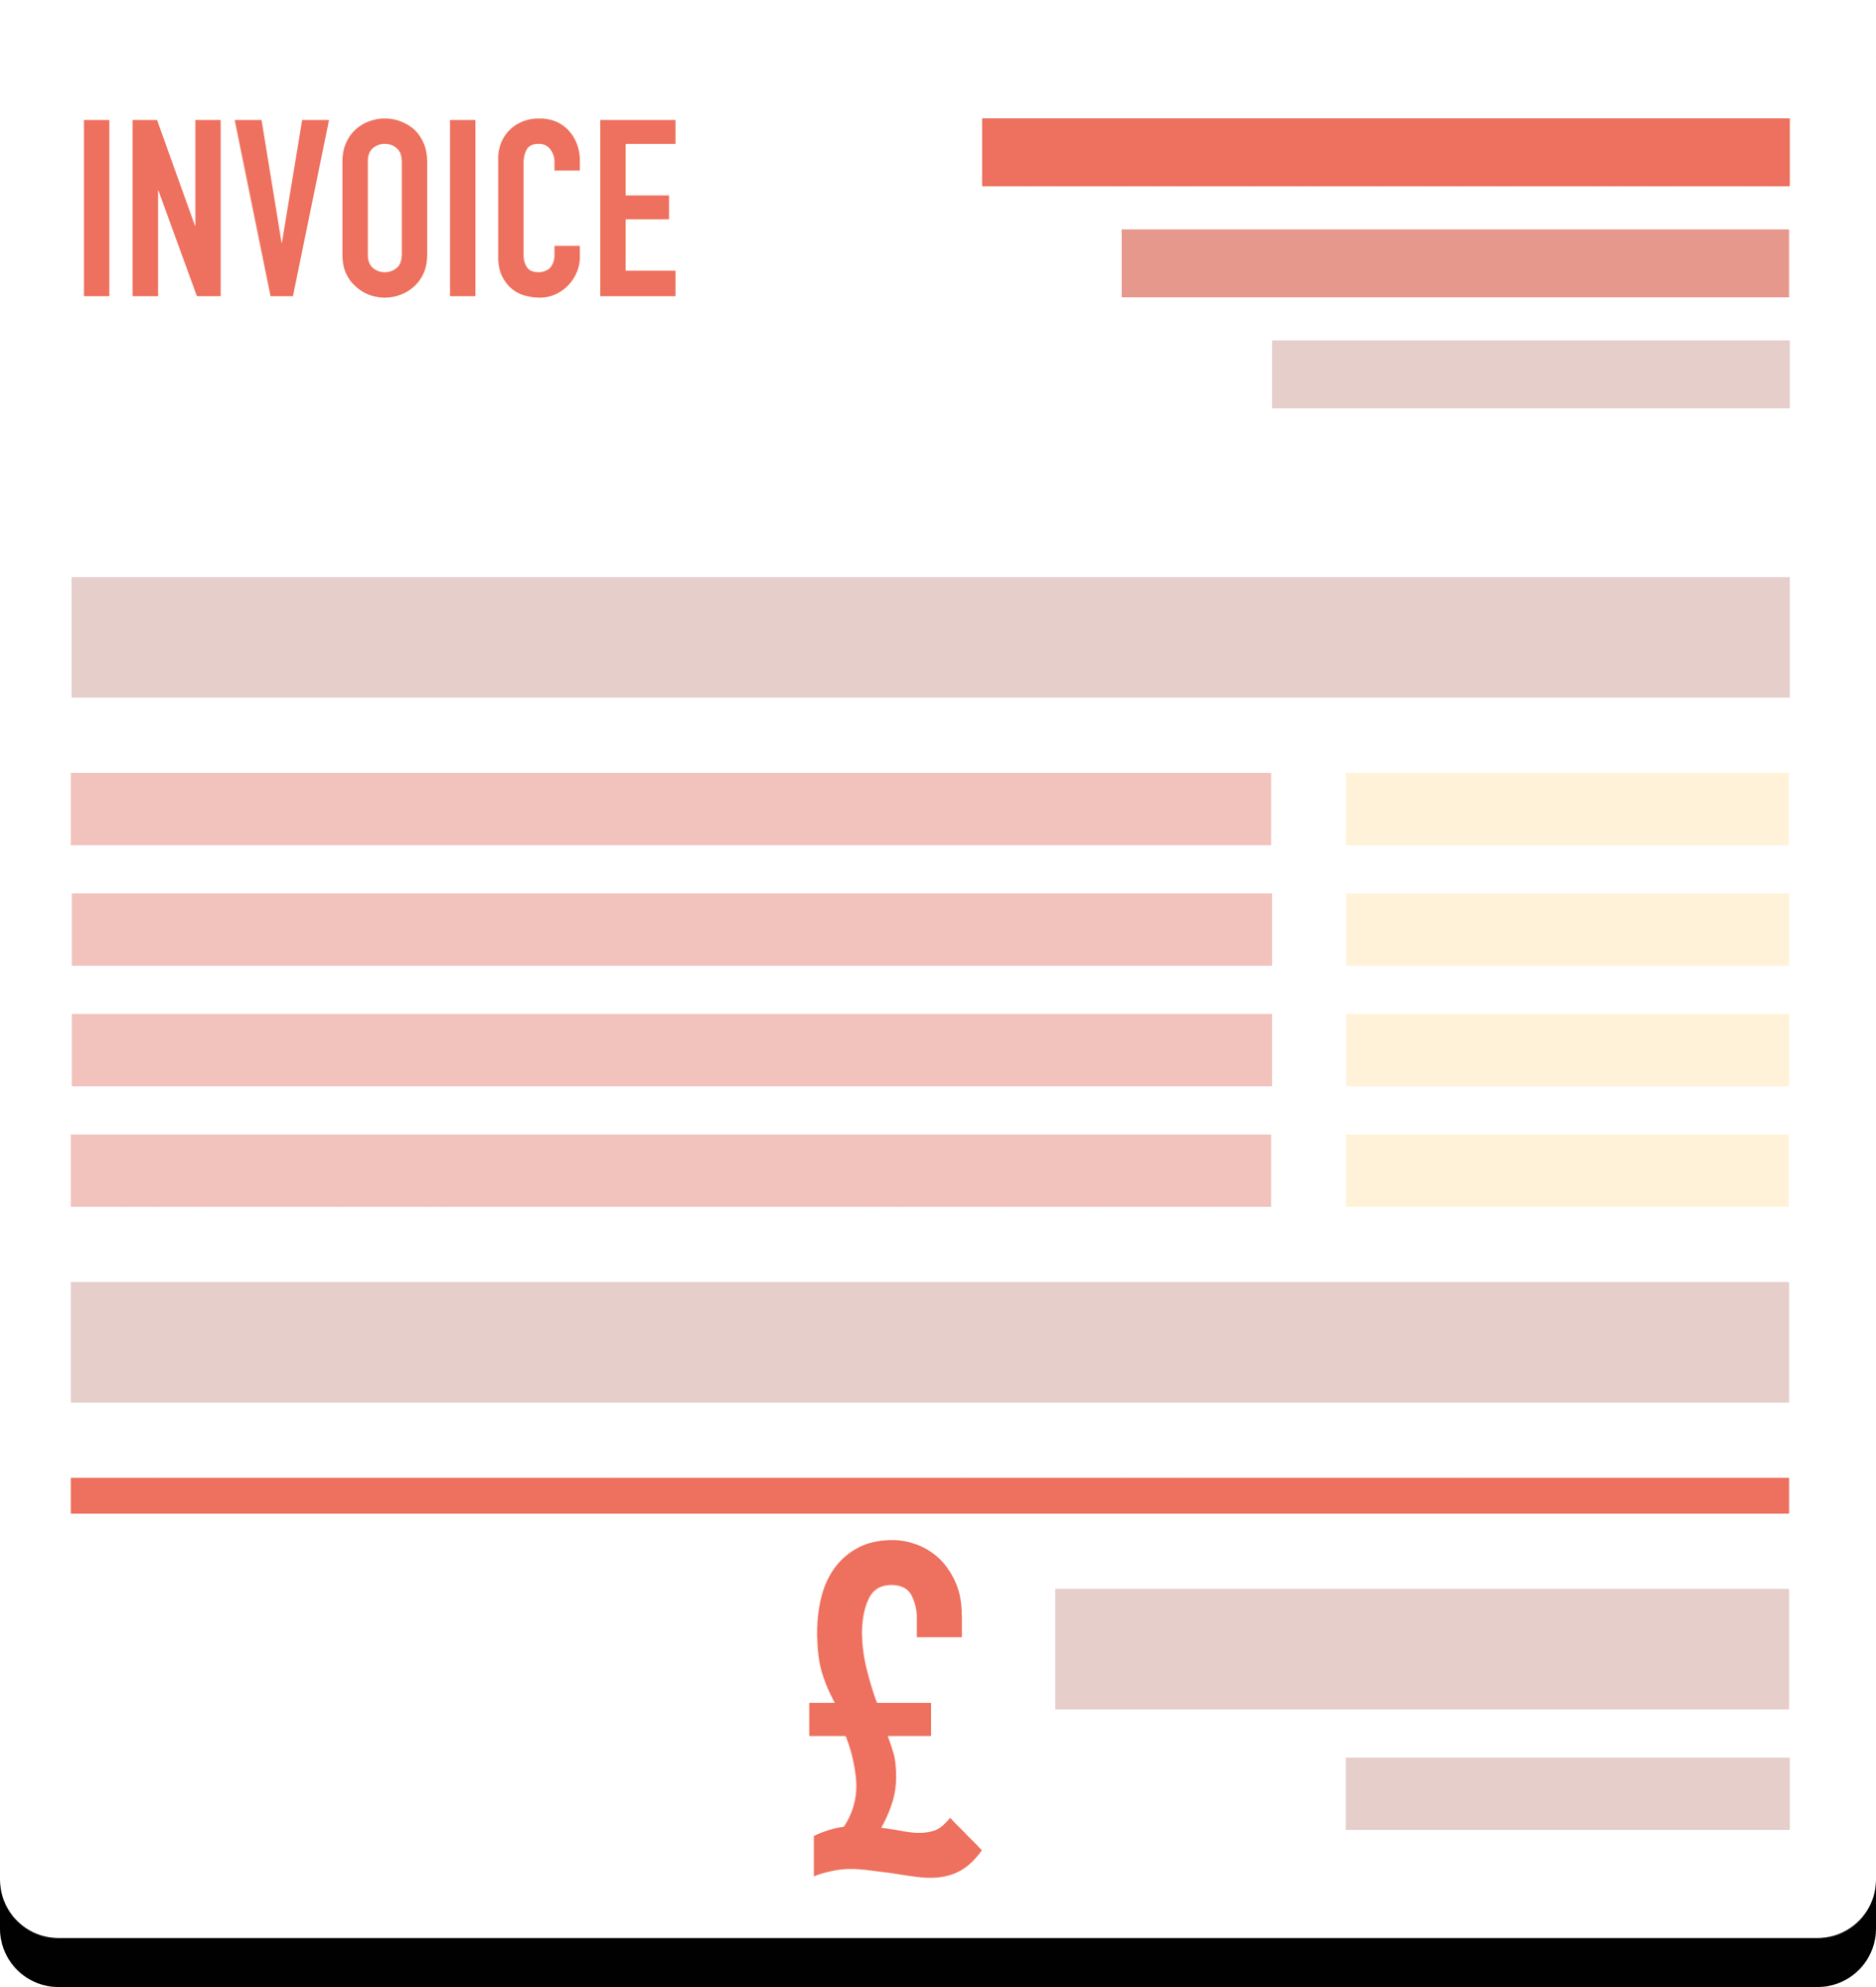 Invoice Template for Tiling Company